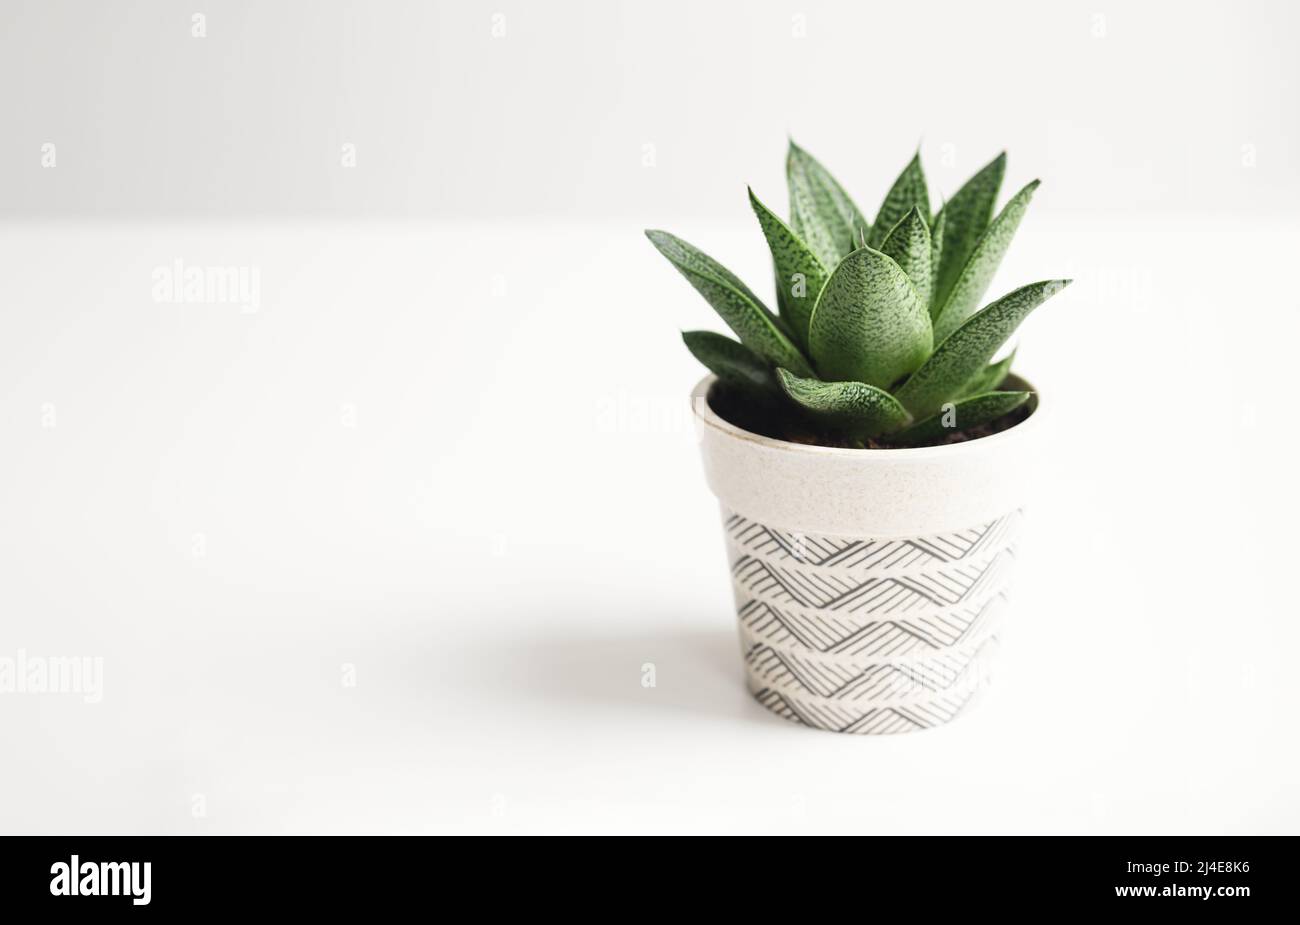 Houseplant succulent on a white background with copy space, home gardening and connecting with nature concept Stock Photo